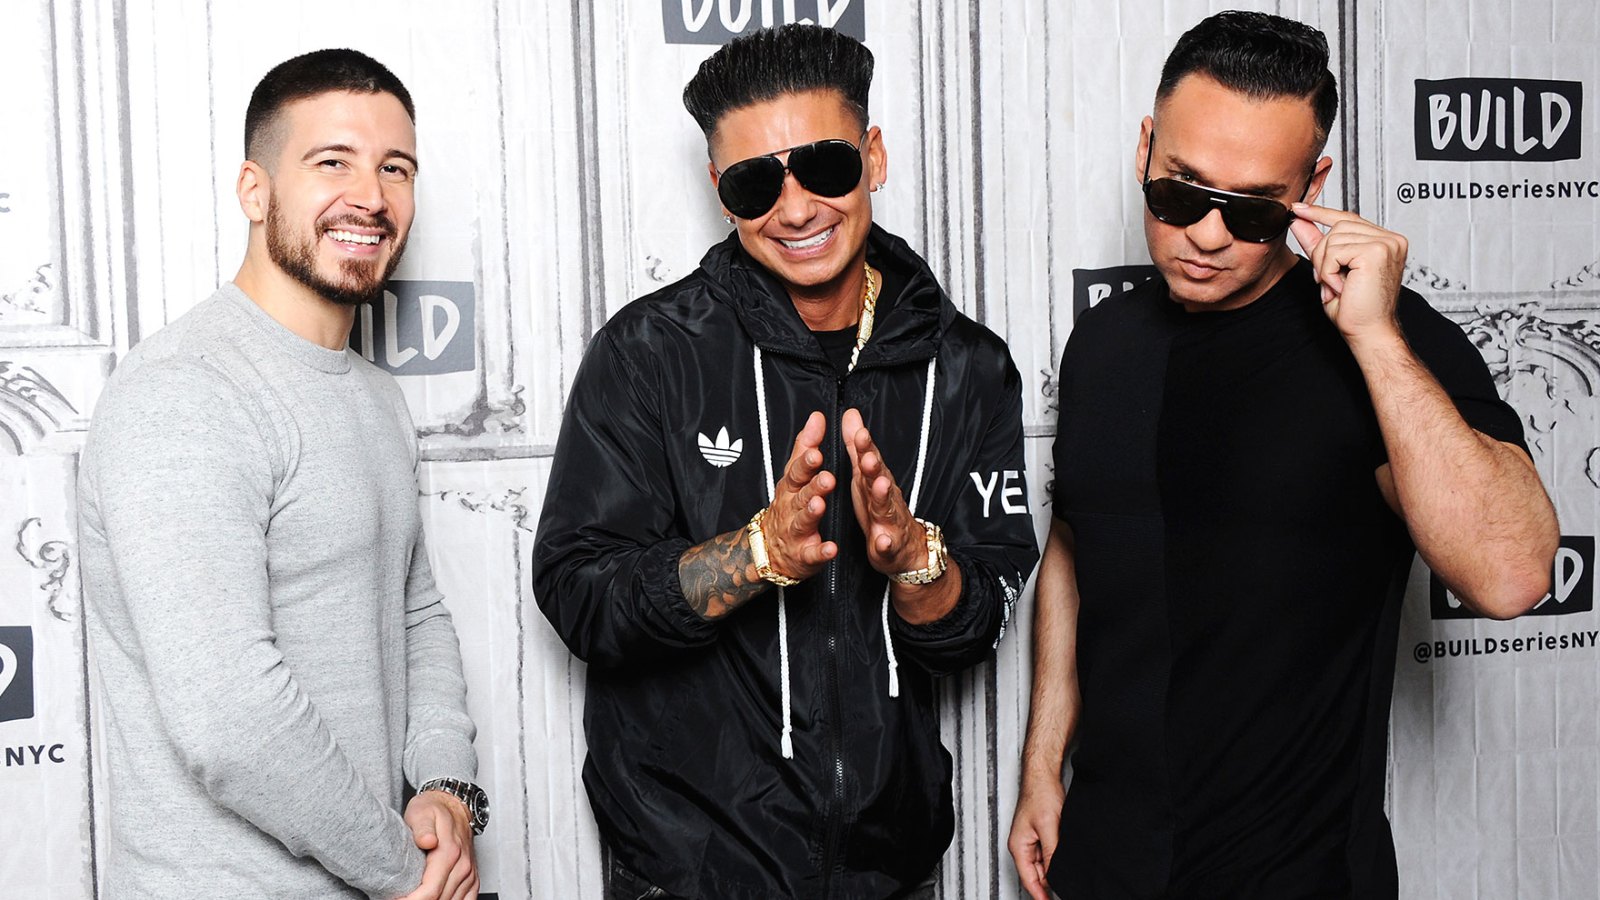 Vinny Guadagnino, Paul 'Pauly D' Delvecchio and Mike 'The Situation' Sorrentino